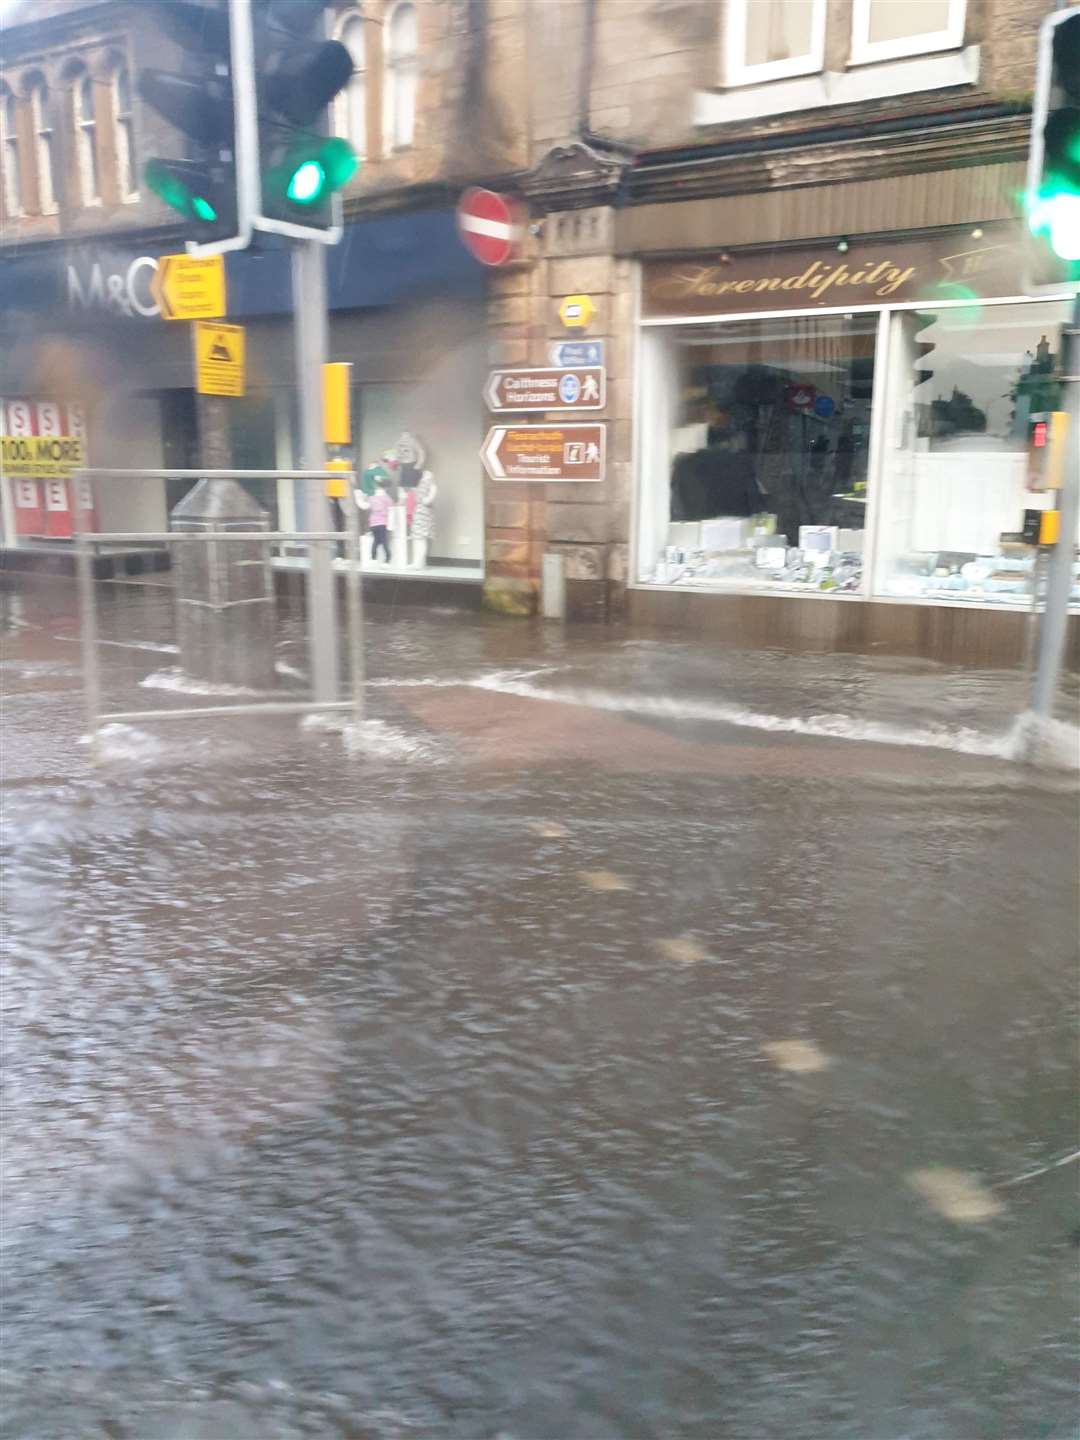 Flooding in Thurso town centre at the beginning of August 2019 which caused damage to a number of shop premises in the town centre. Picture: Anne-marie Eddowes